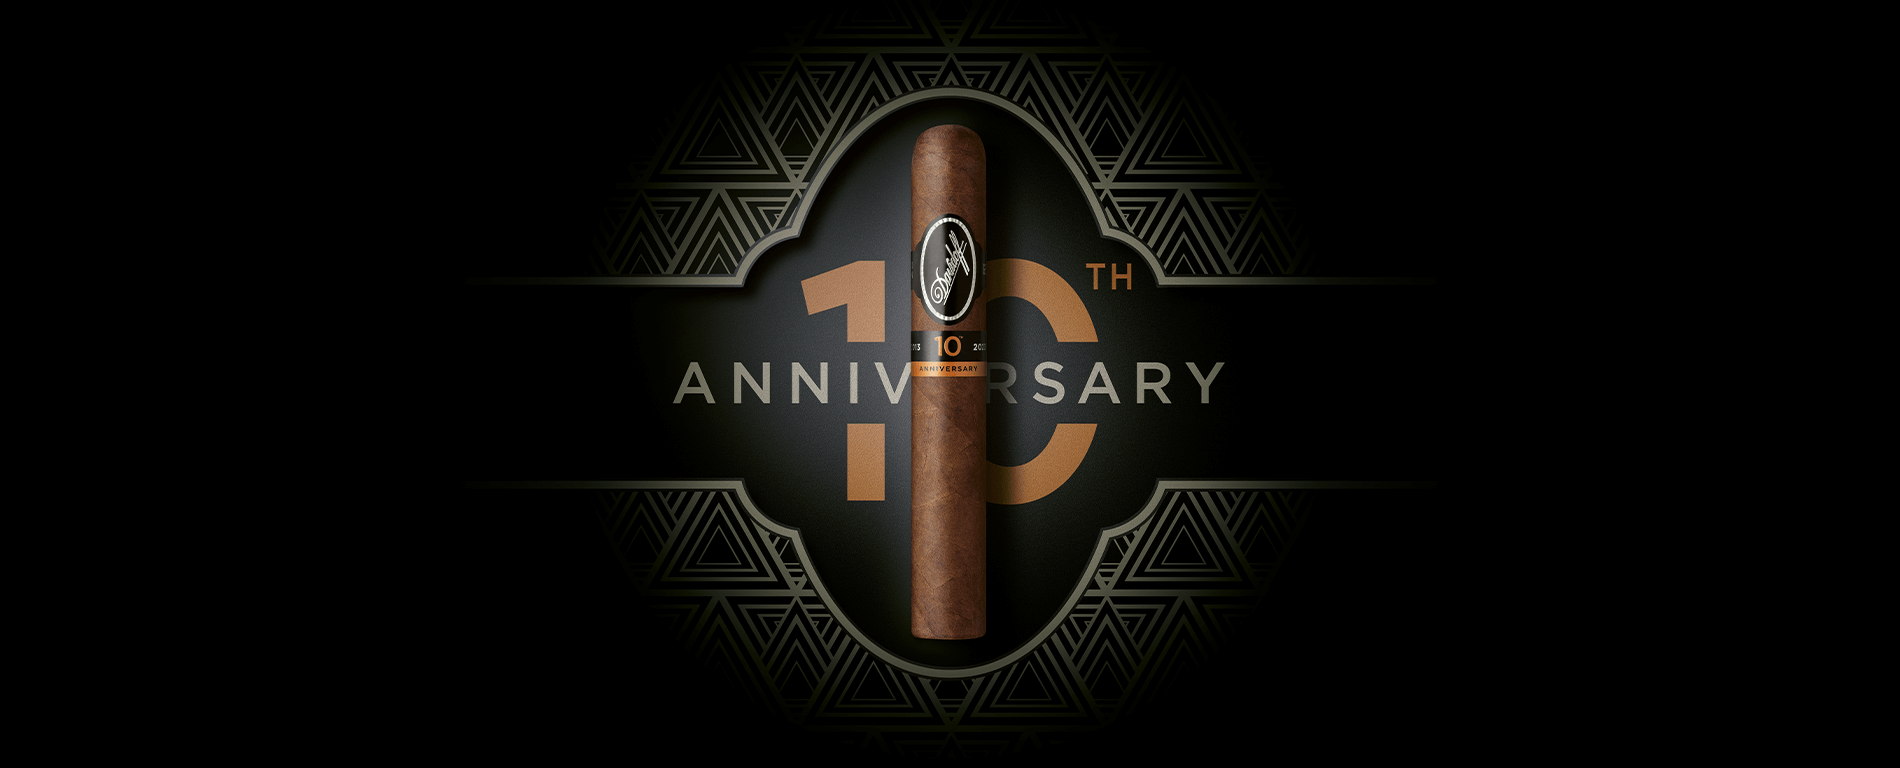 Discover the Davidoff Nicaragua 10th Anniversary Limited Edition